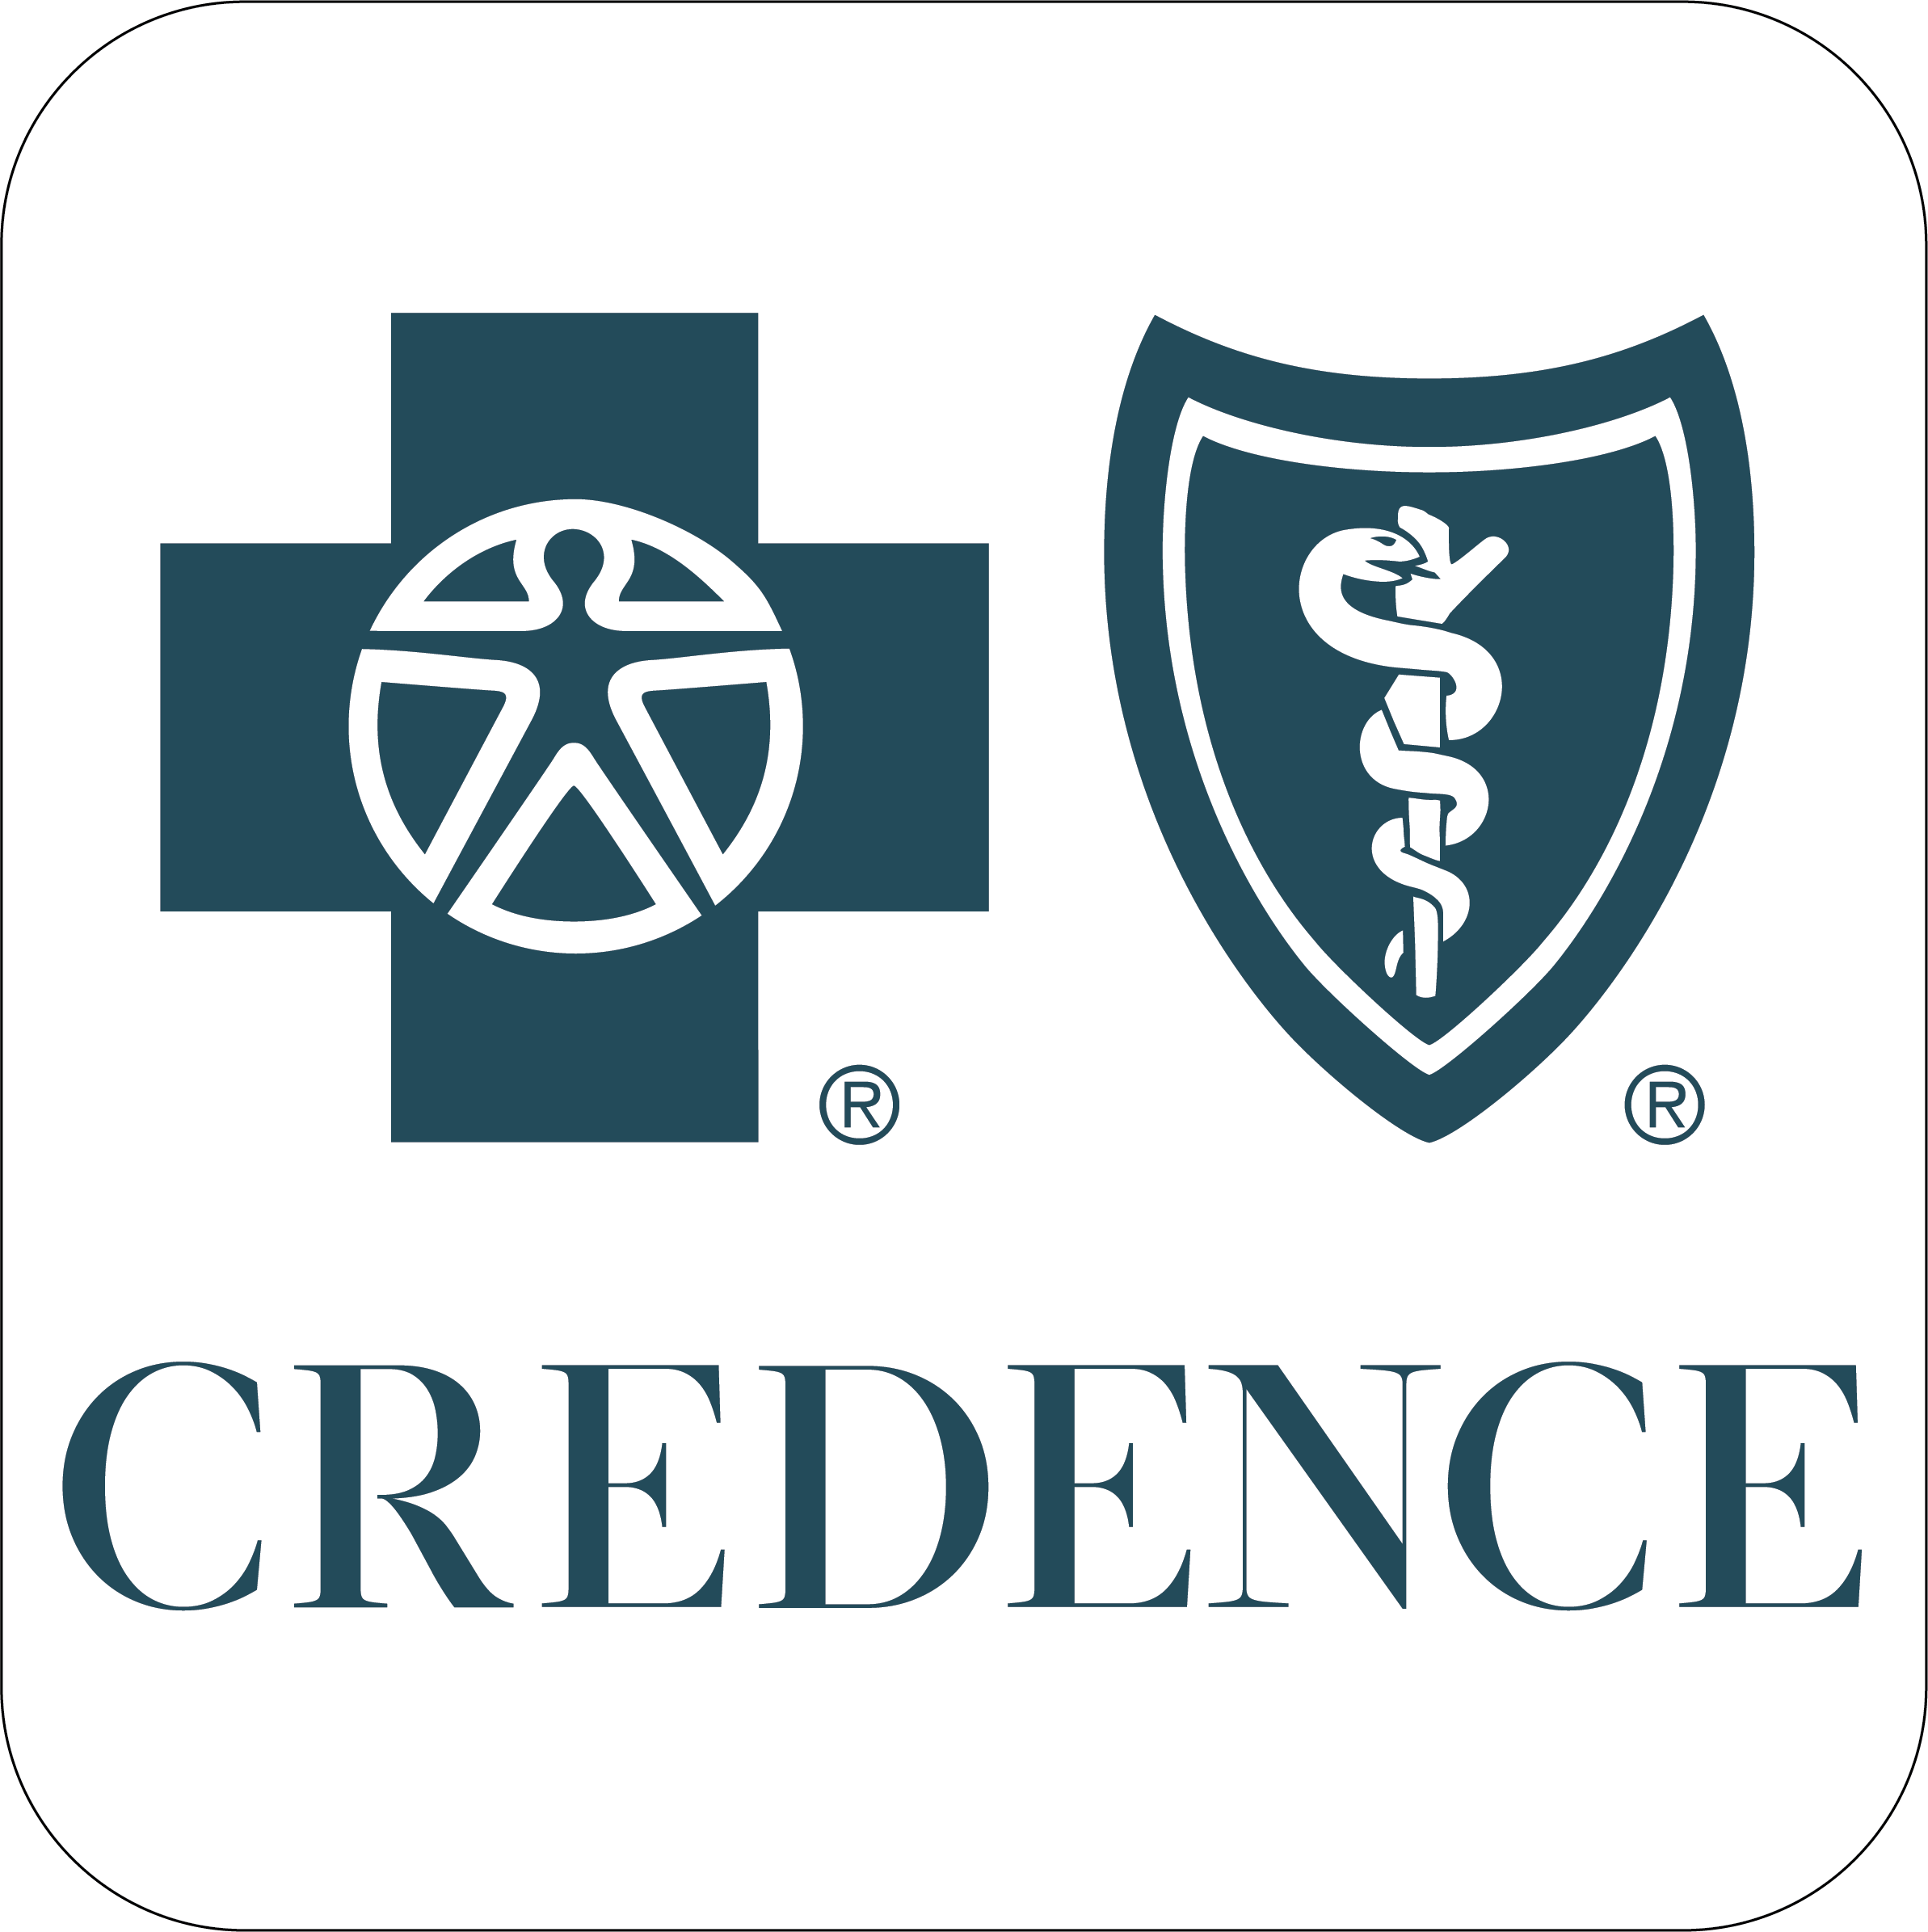 Credence app icon